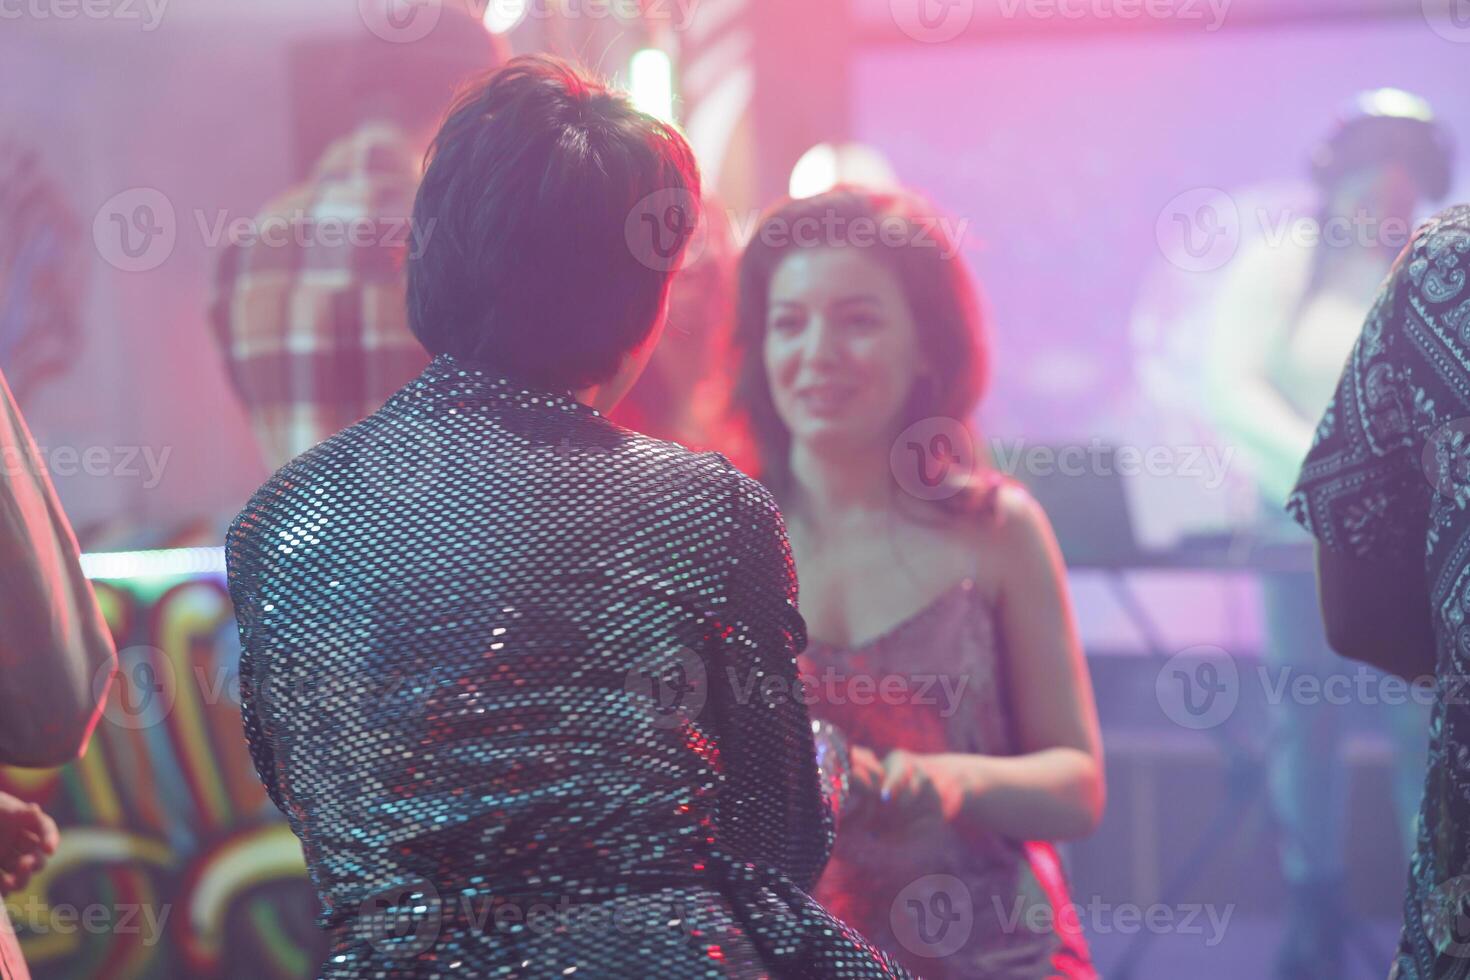 Women talking while relaxing at discotheque party in nightclub. Girlfriends having conversation and enjoying nightlife leisure while clubbing and attending disco gathering in club photo